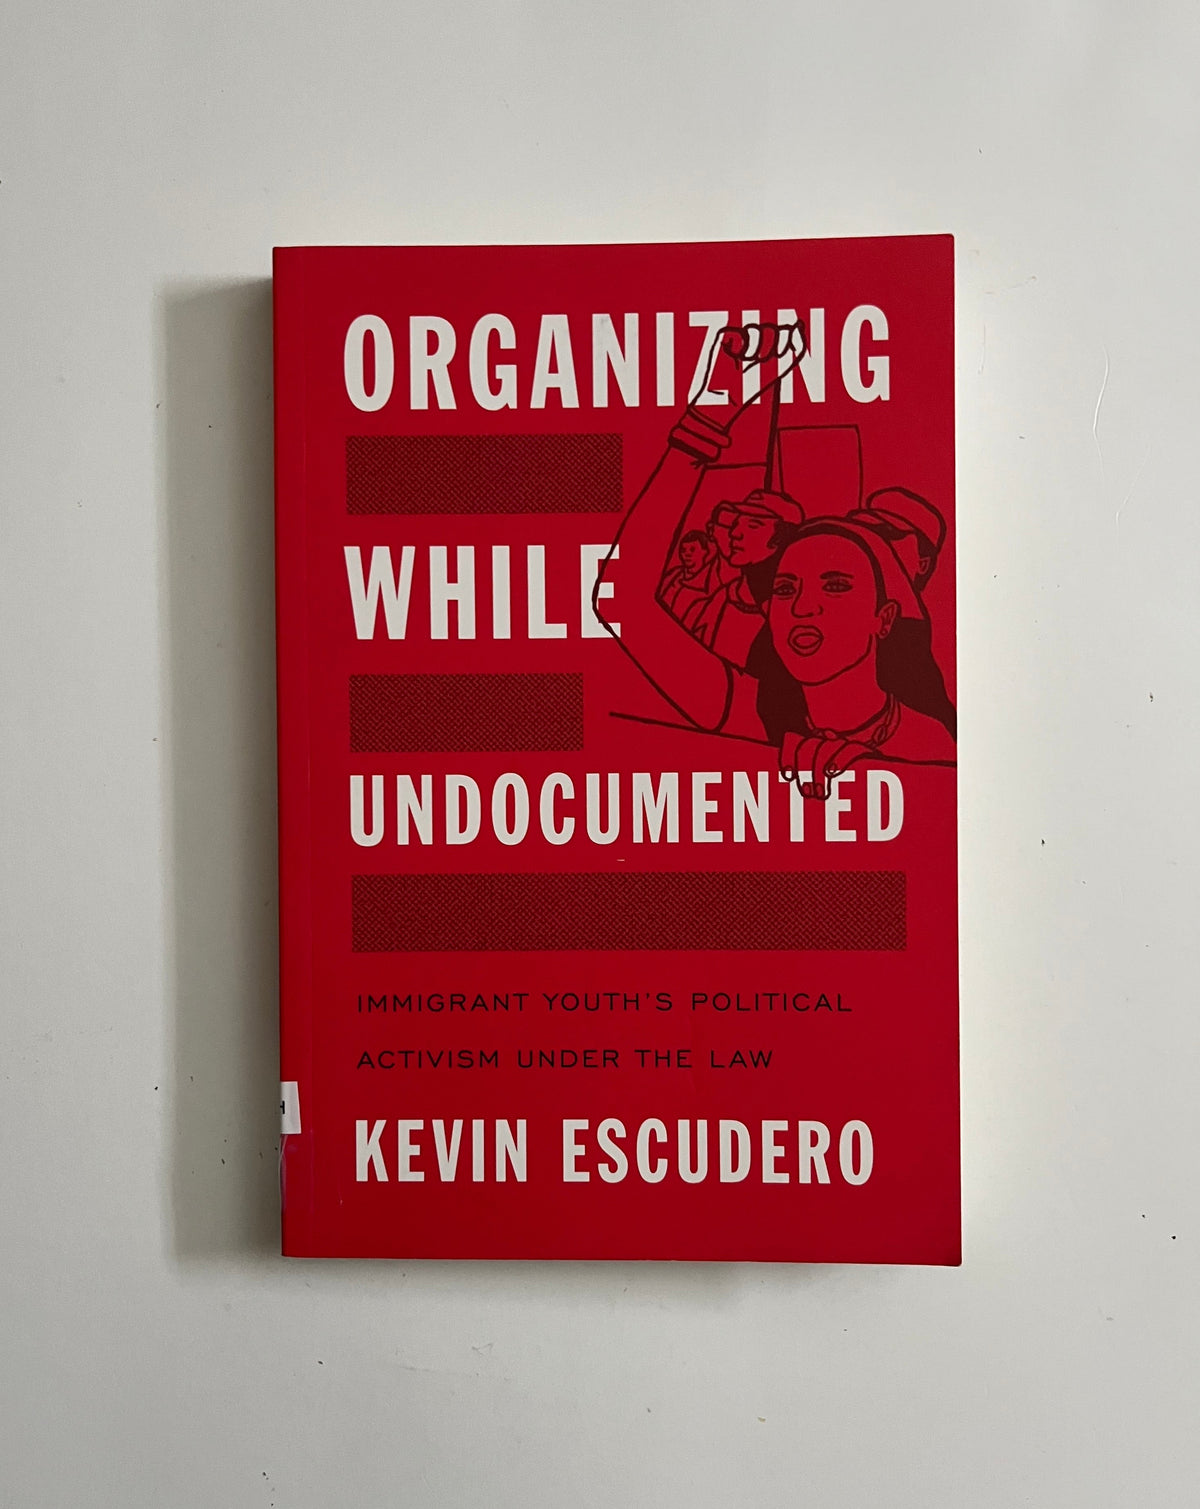 Organizing While Undocumented: Immigrant Youth’s Political Activism Under the Law by Kevin Escudero